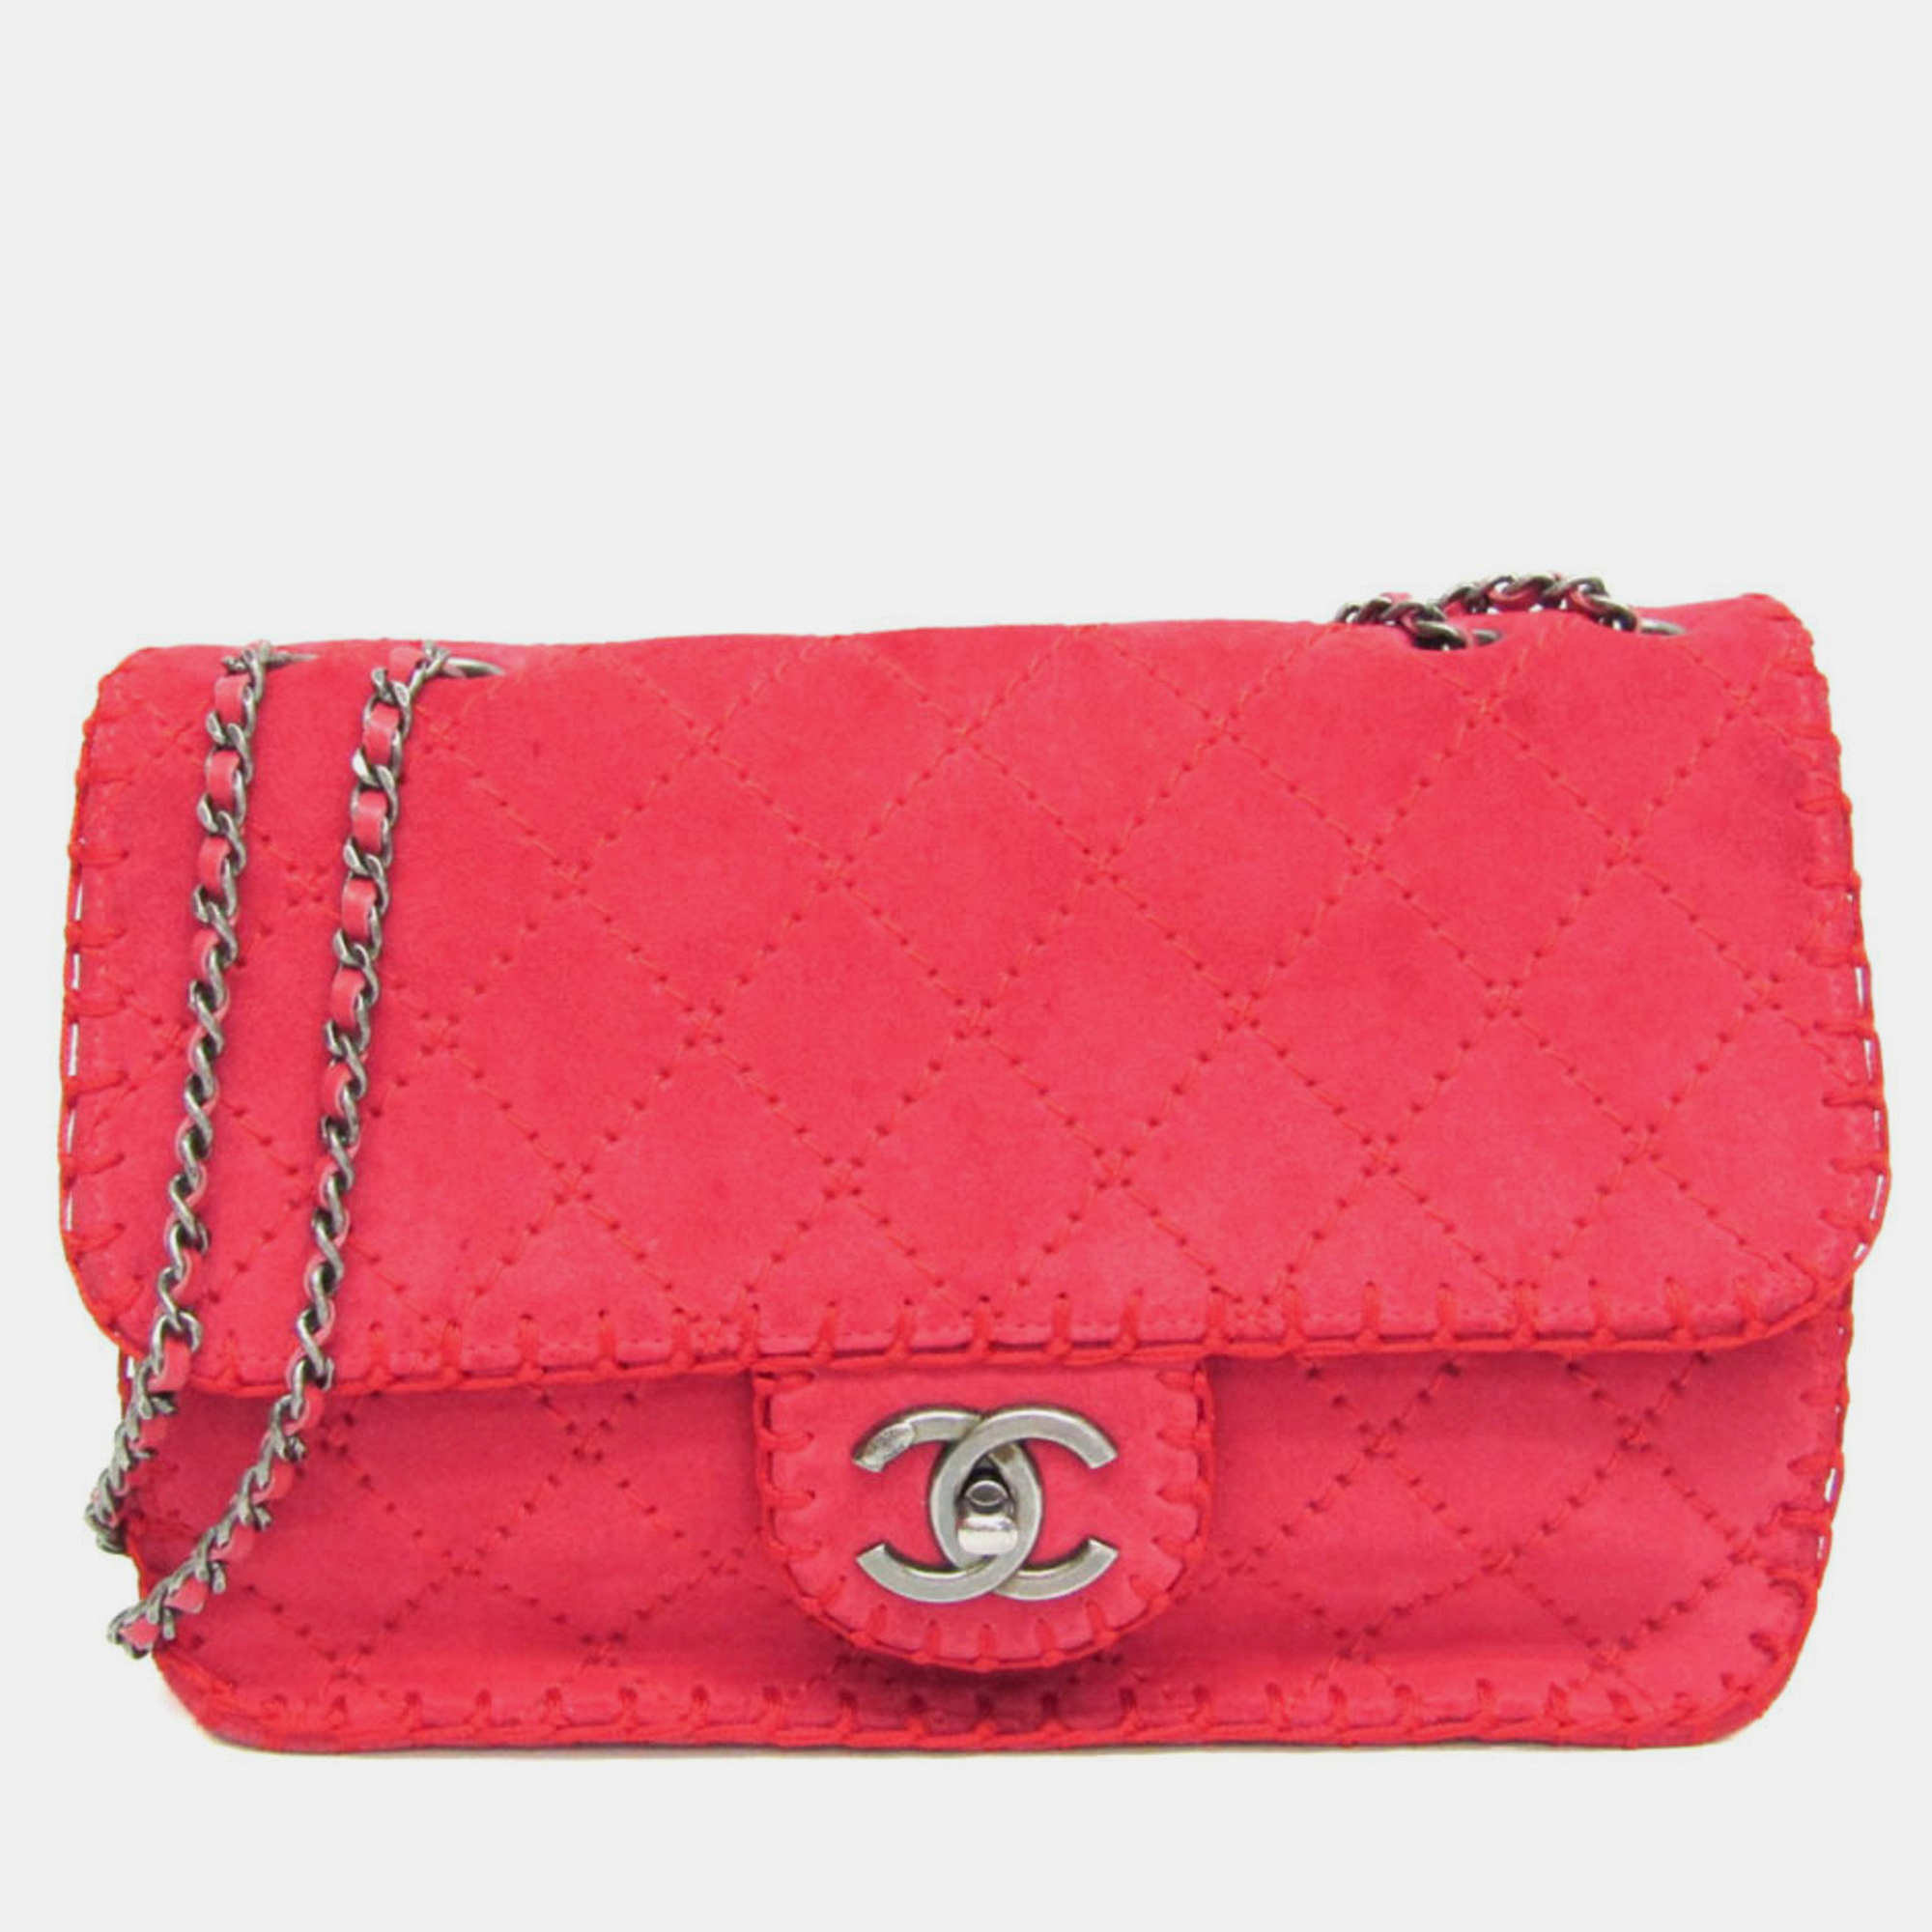 Chanel pink/red suede ultimate stitch flap bag